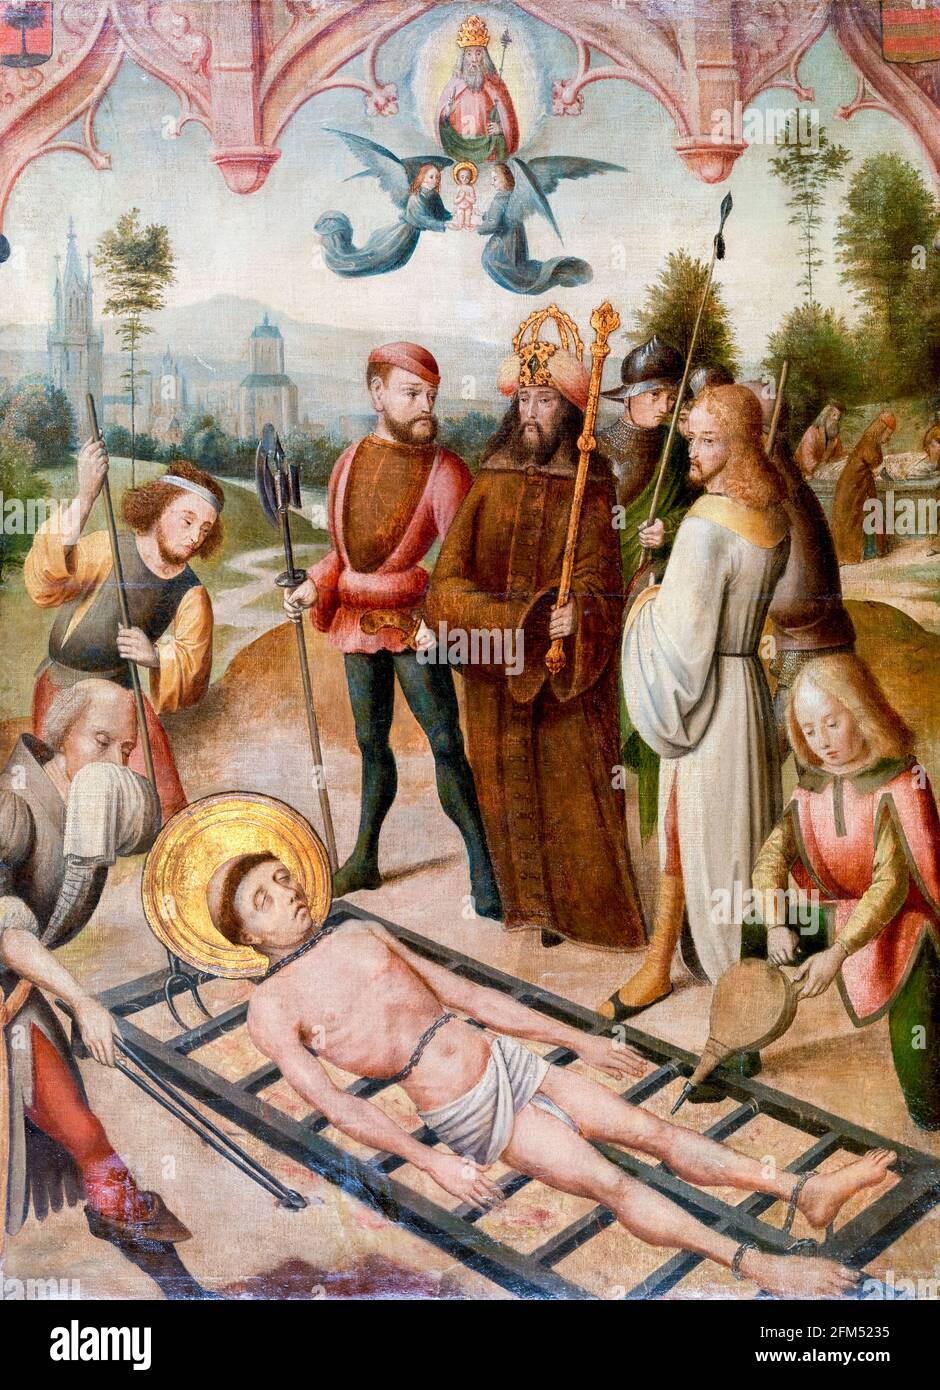 Martyrdom of Saint Lawrence, painting by Master of the Saint Ursula Legend, 1485-1510 Stock Photo